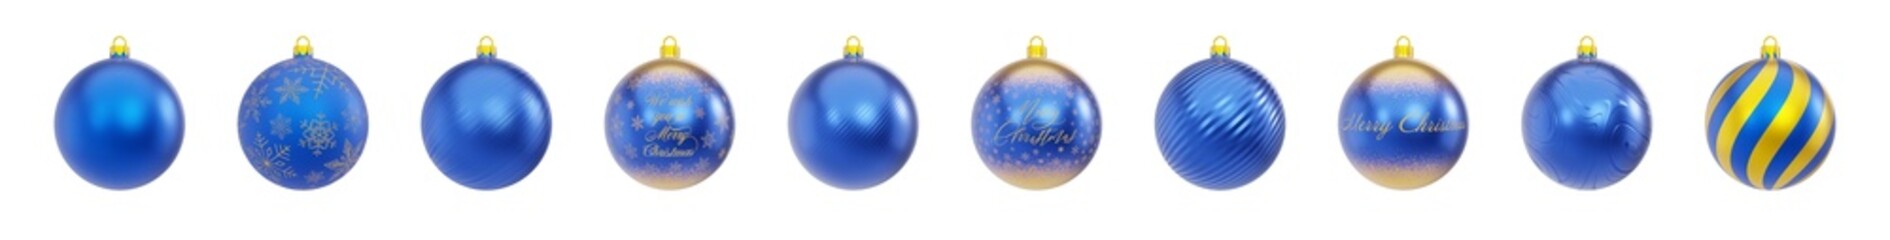 Blue Christmas balls in a wide variety of textures and finishes. Pack of Christmas ornaments. Realistic rendering.